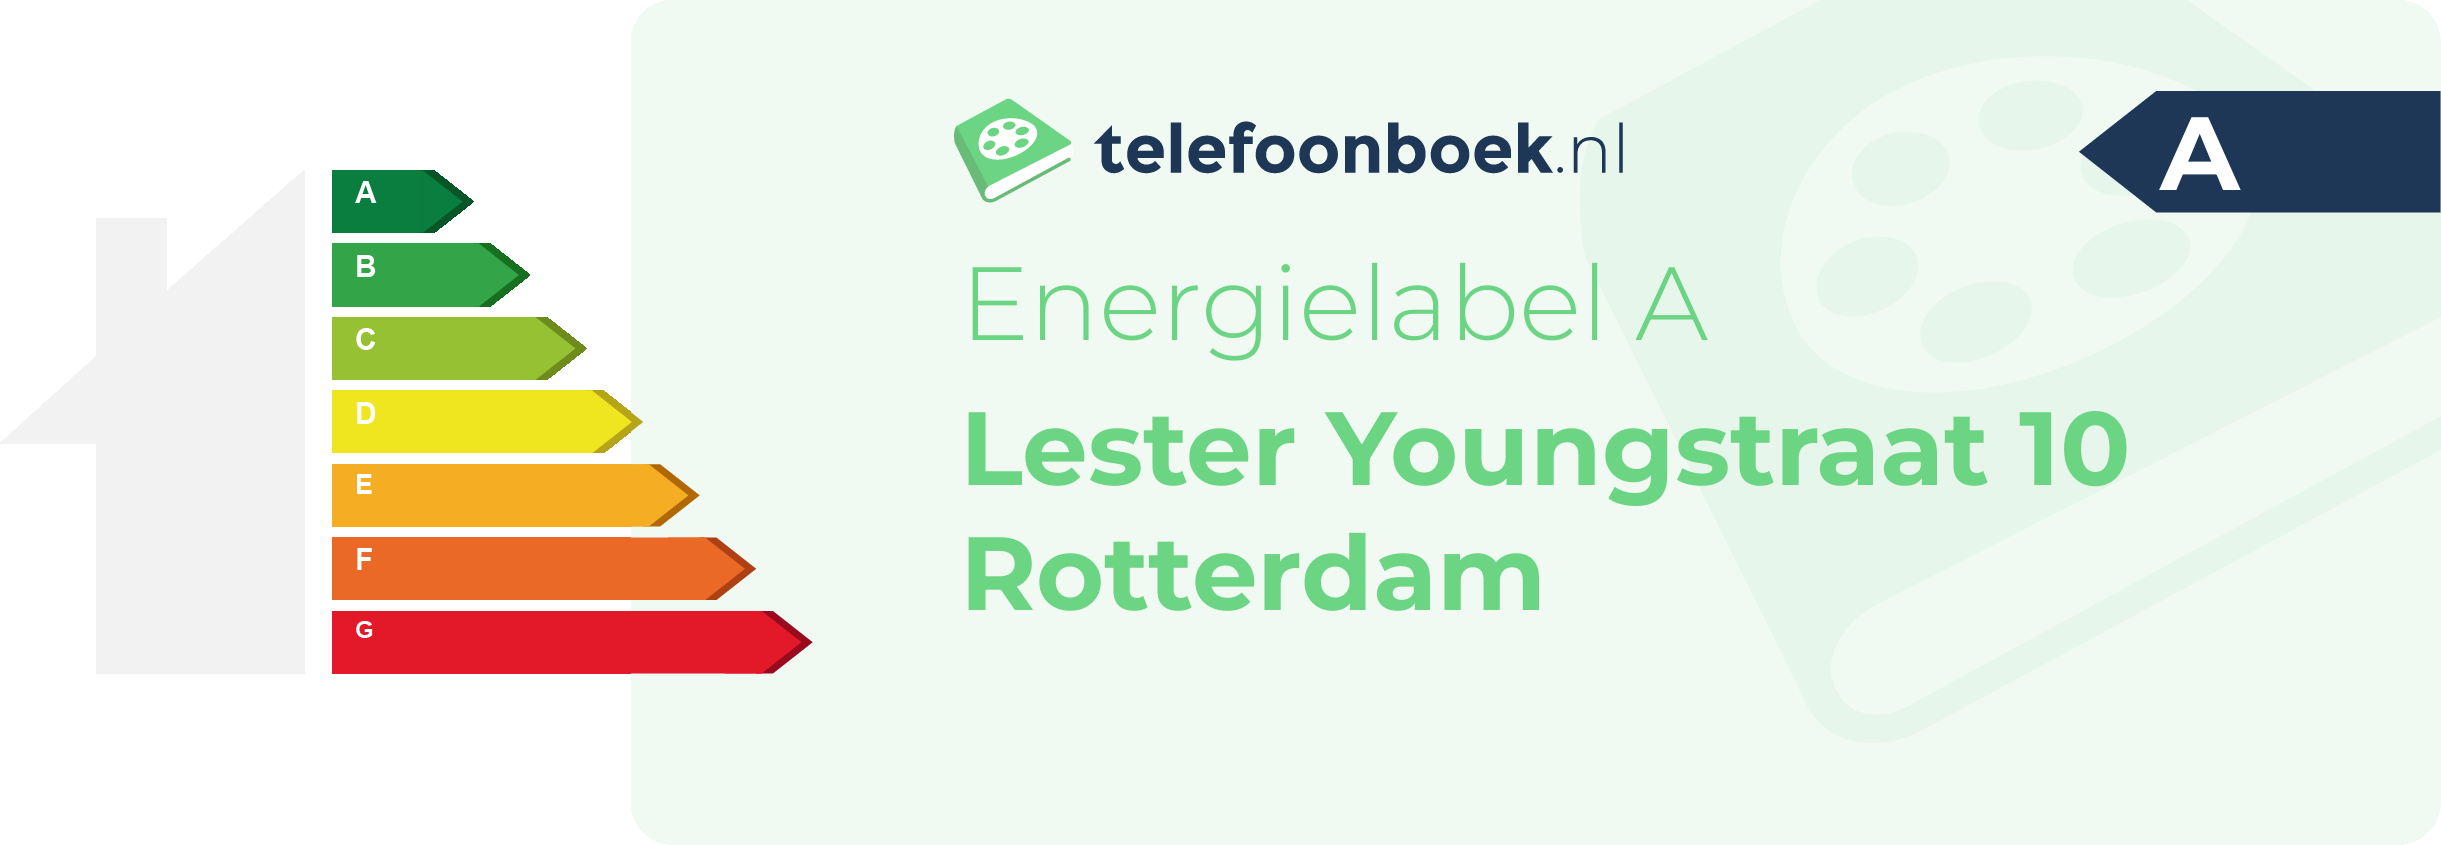 Energielabel Lester Youngstraat 10 Rotterdam